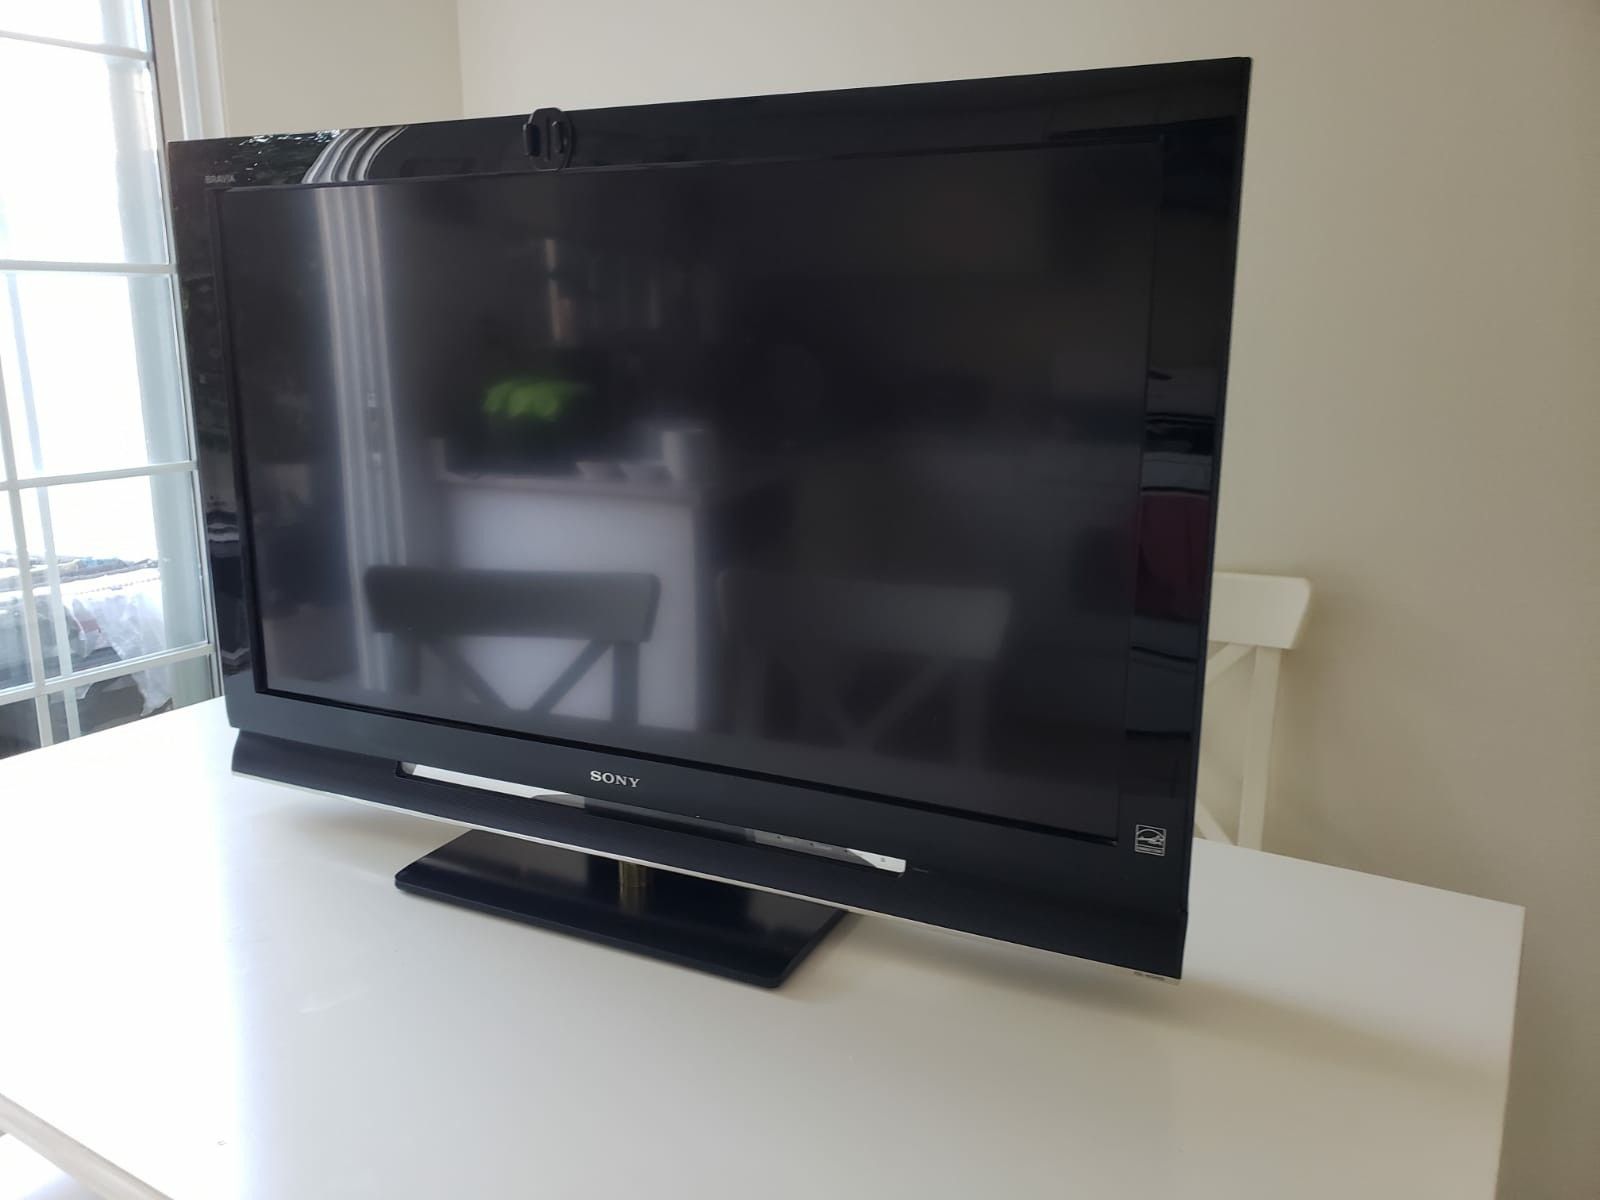 SONY BRAVIA 40" Inches 1080p HD LCD TV Model: KDL-40S4100 with Remote Control